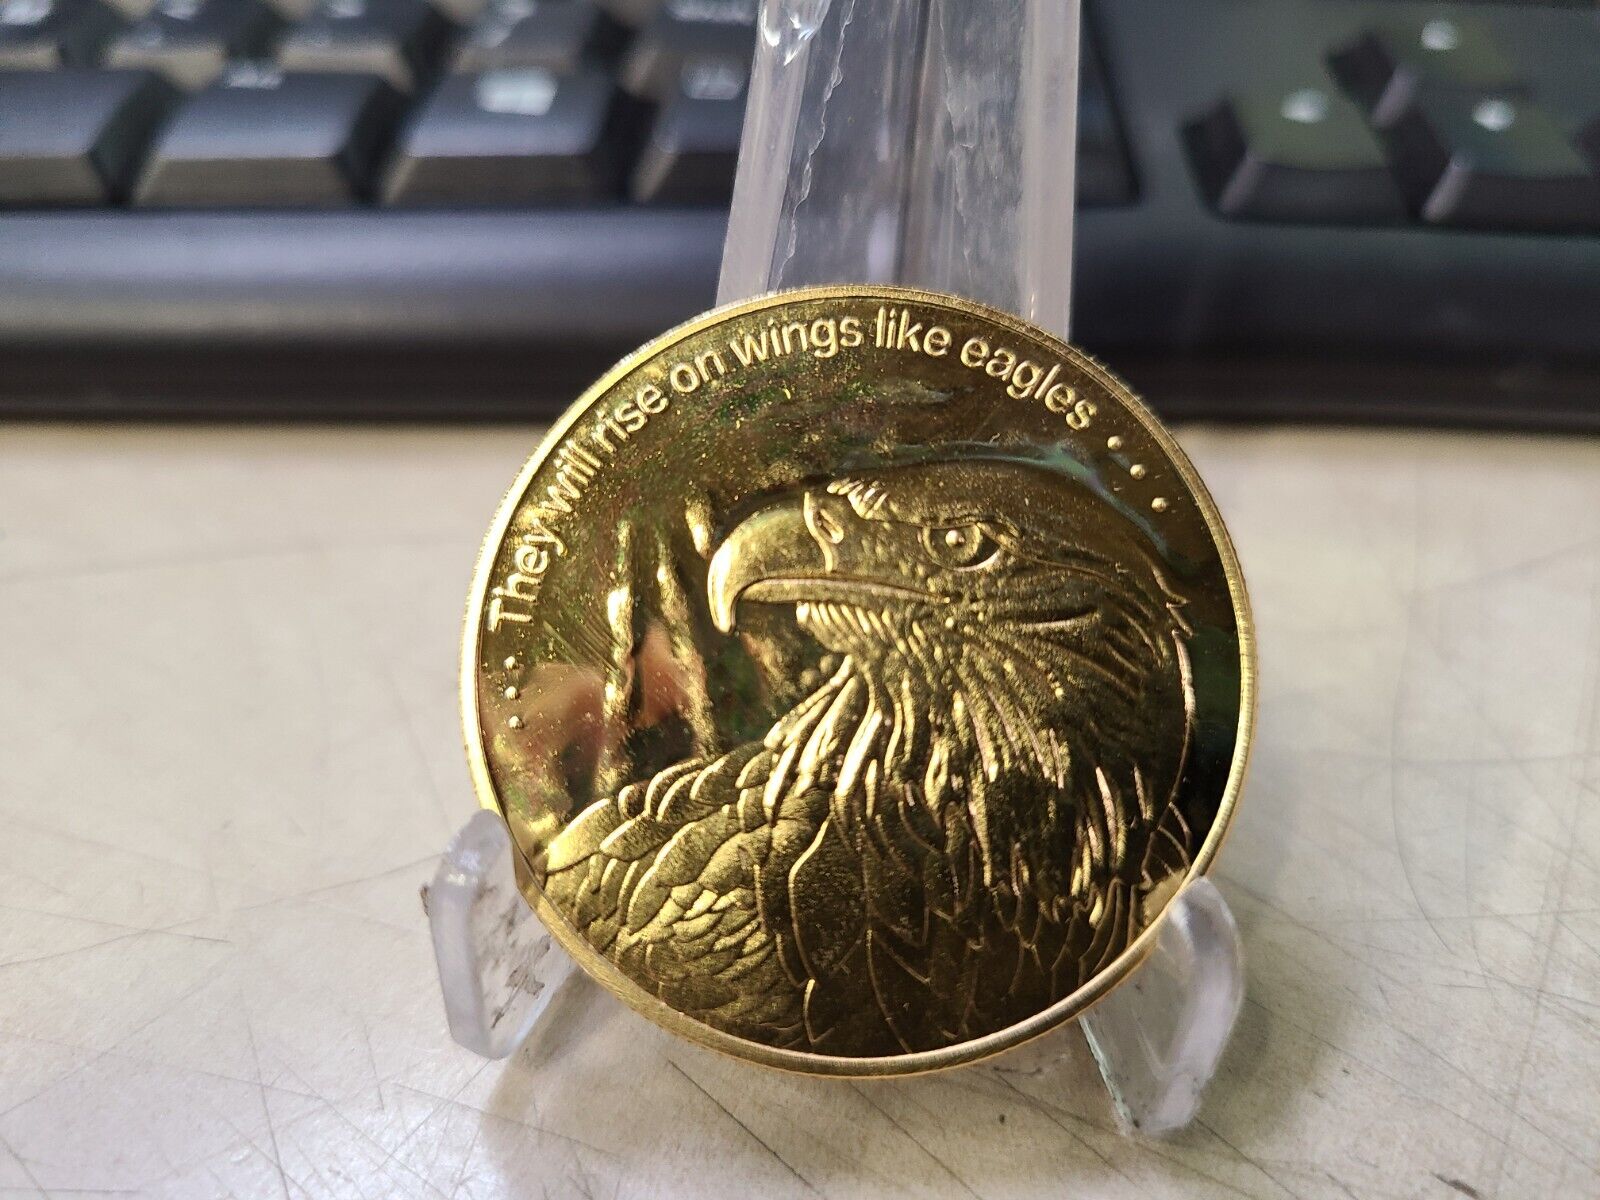 Challenge Coin - They will rise on wings like eagles